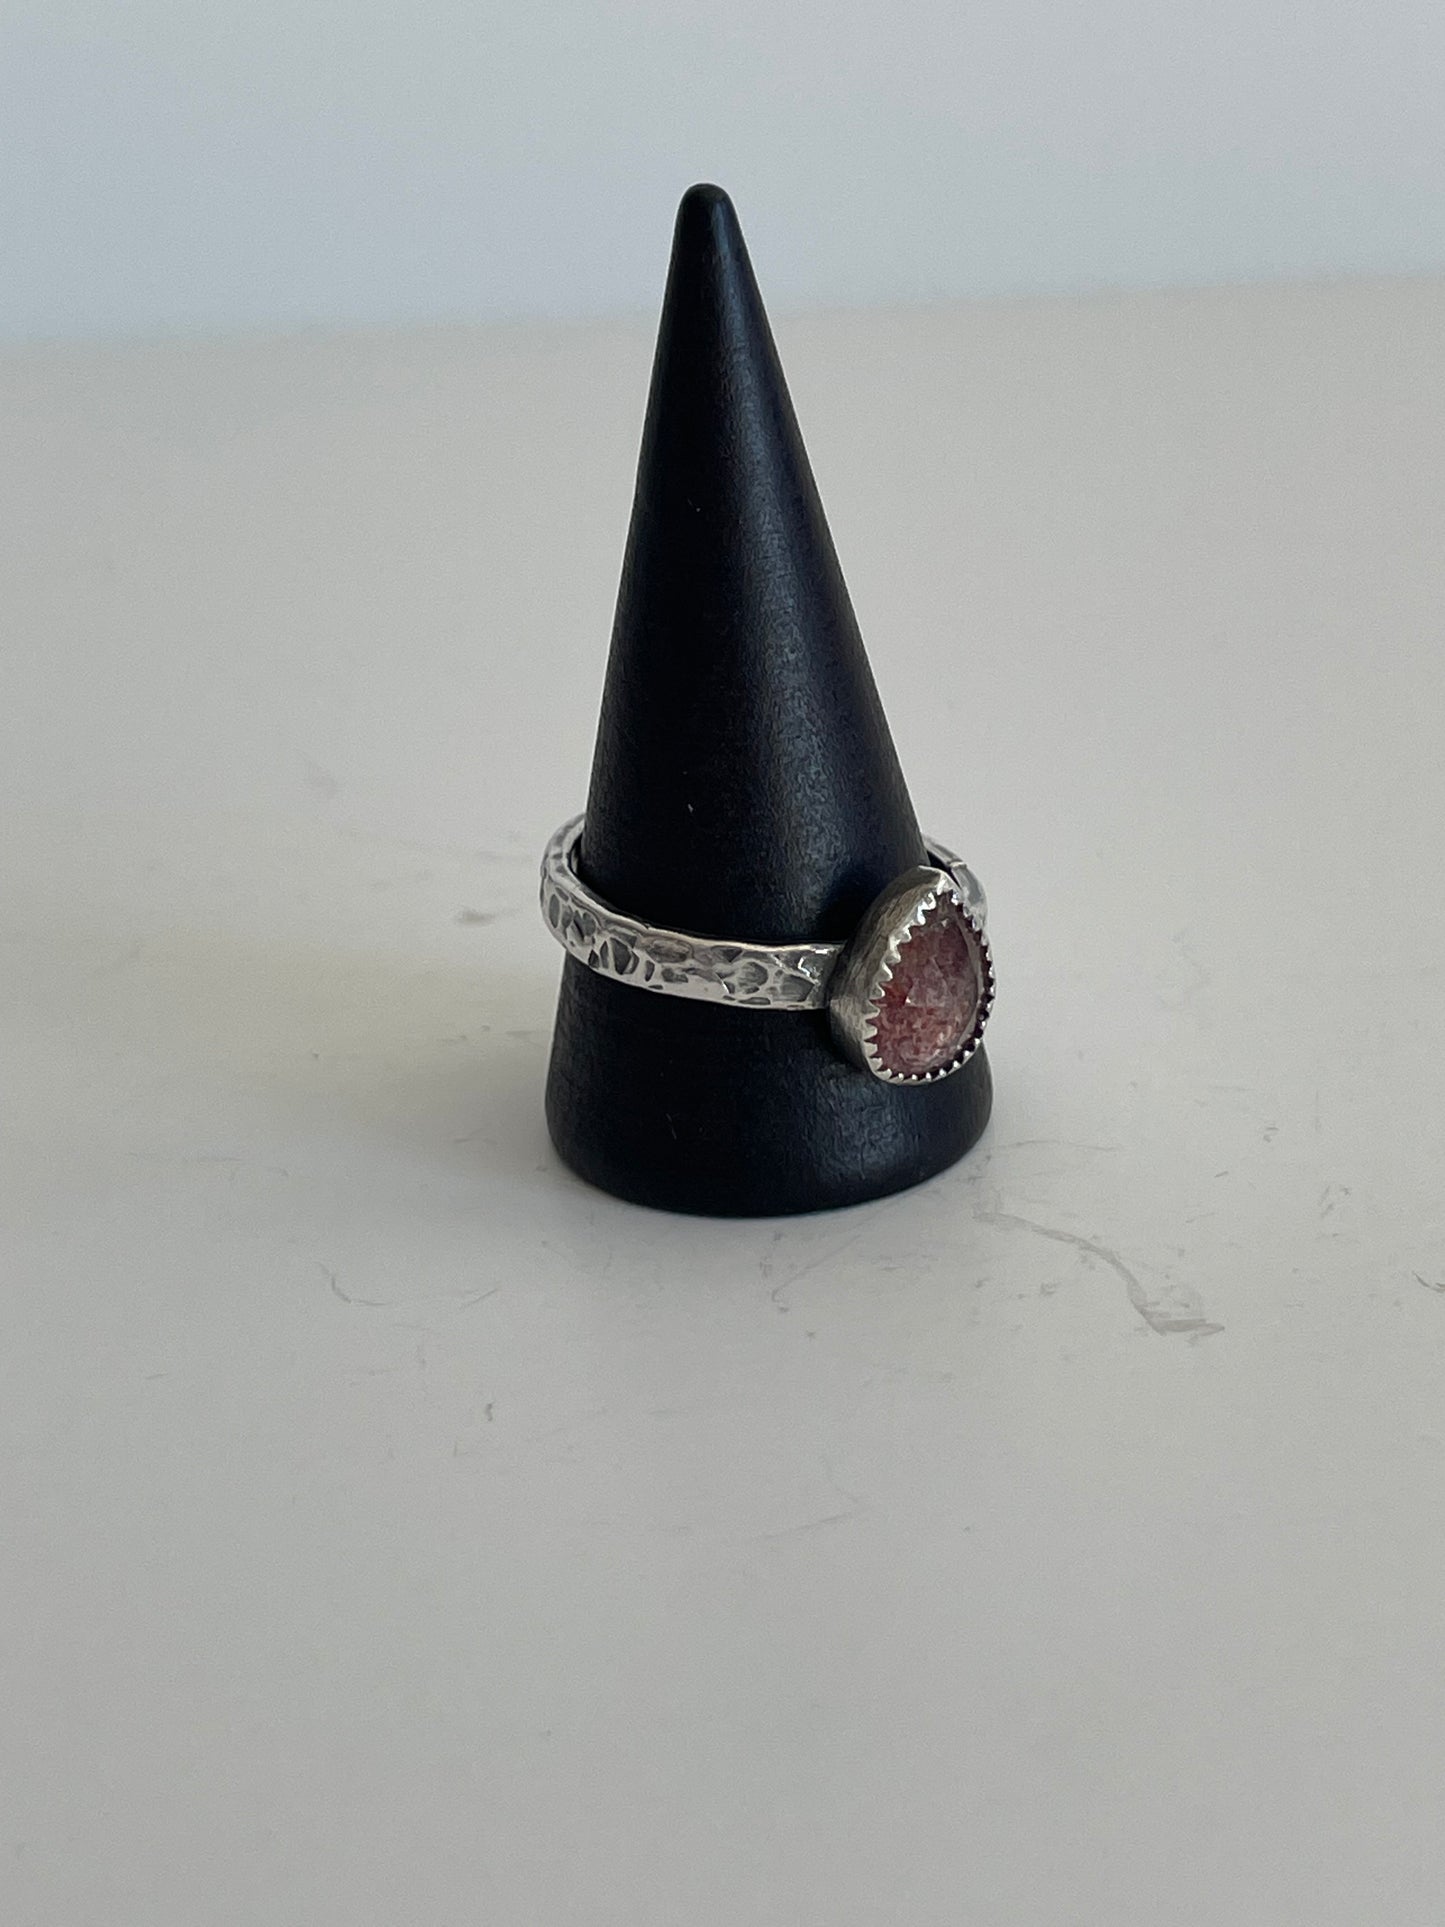 Strawberry Quartz and Sterling Ring - US 10.5